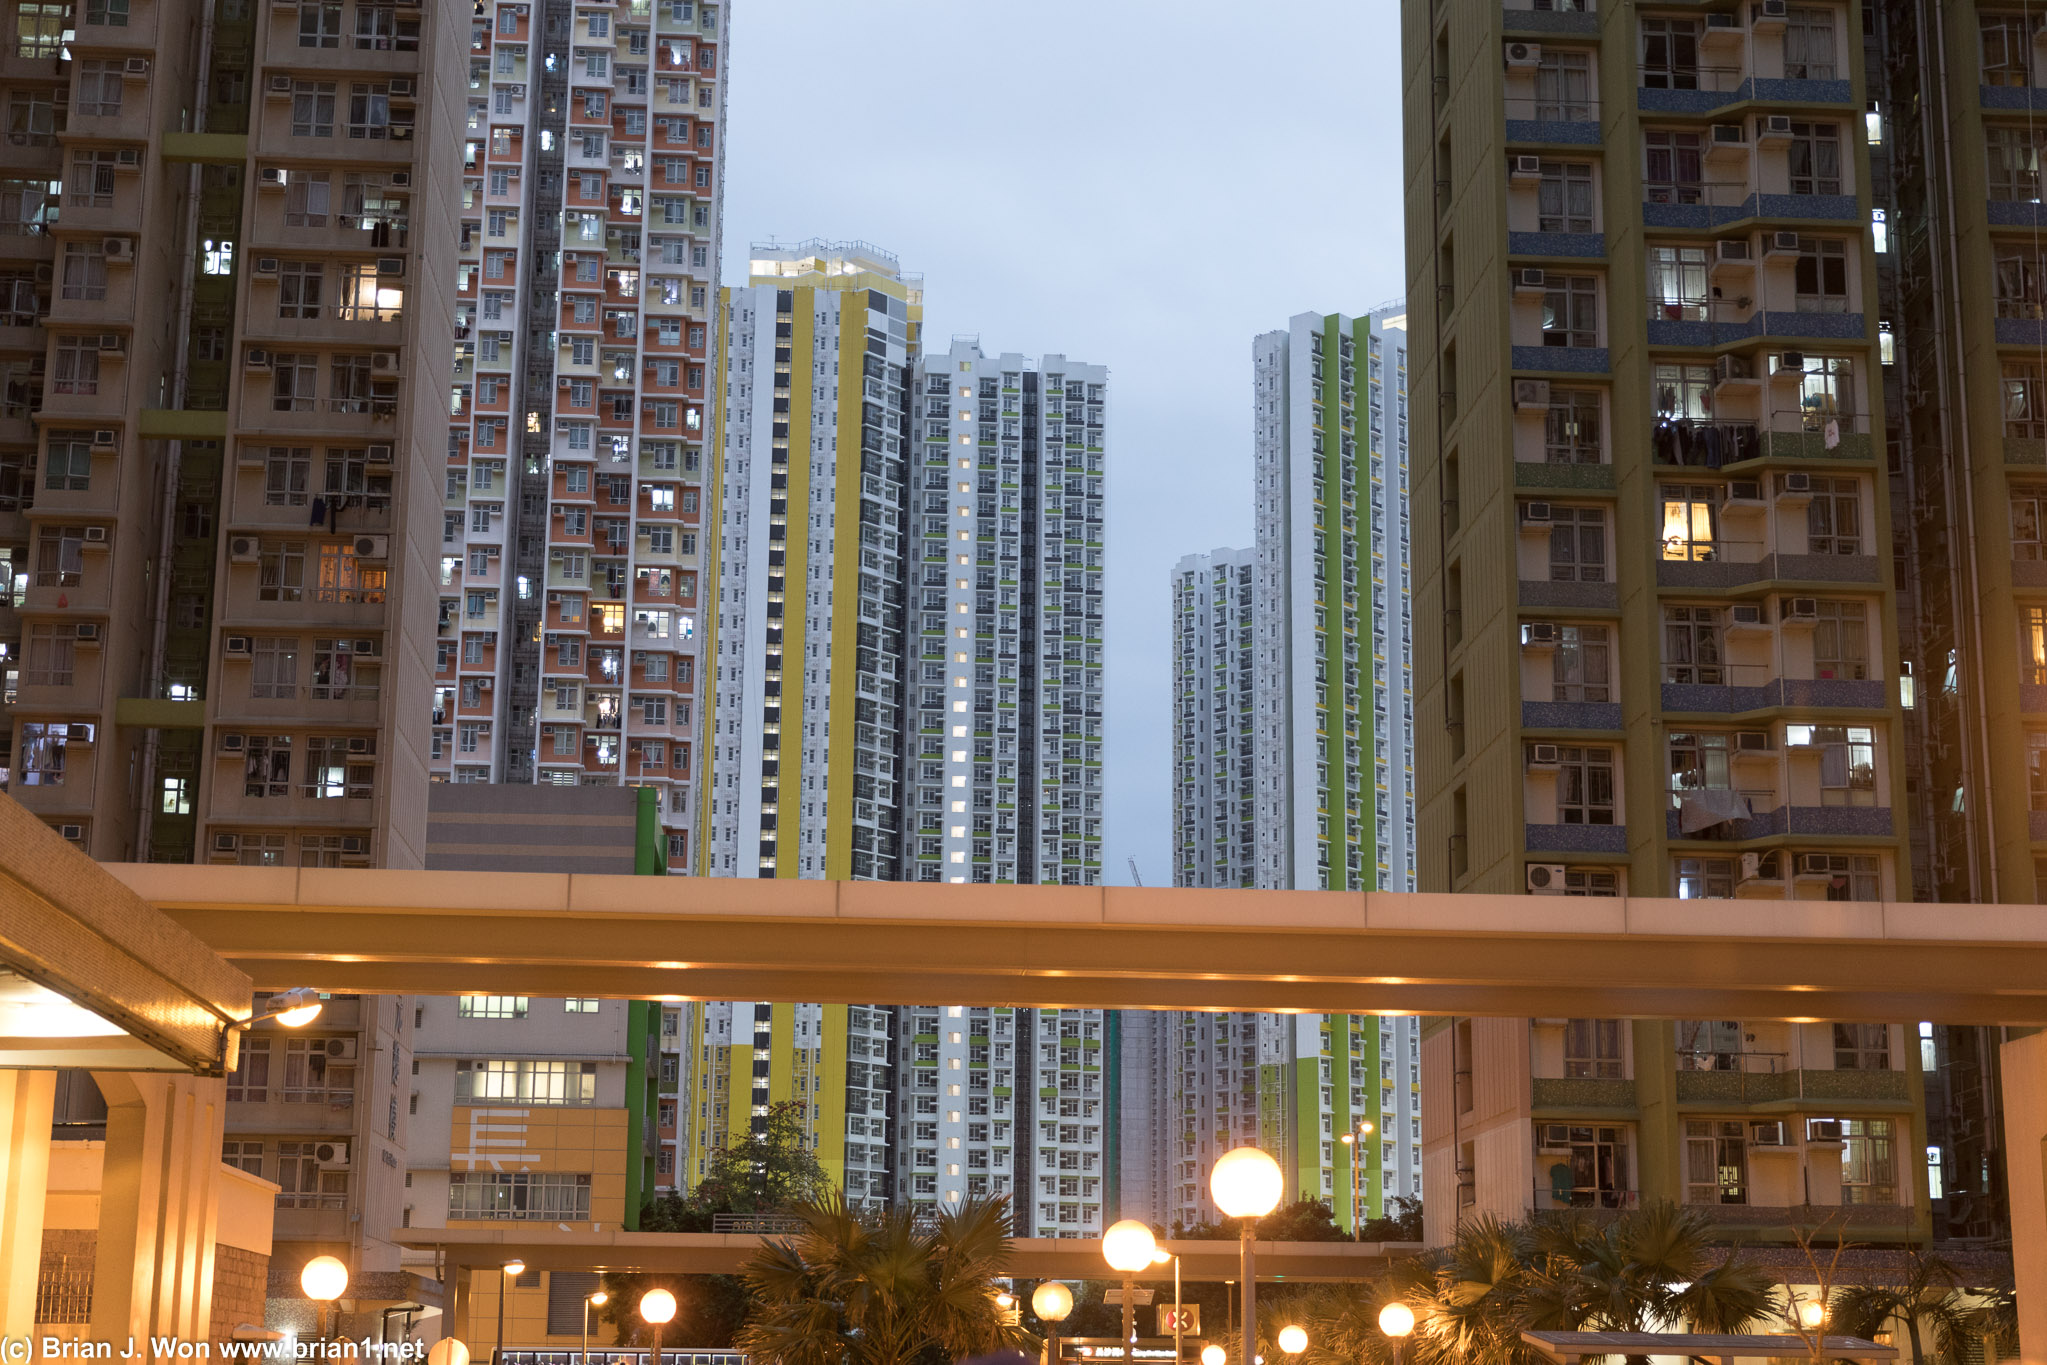 Apartment towers in Cheung Sha Wan.